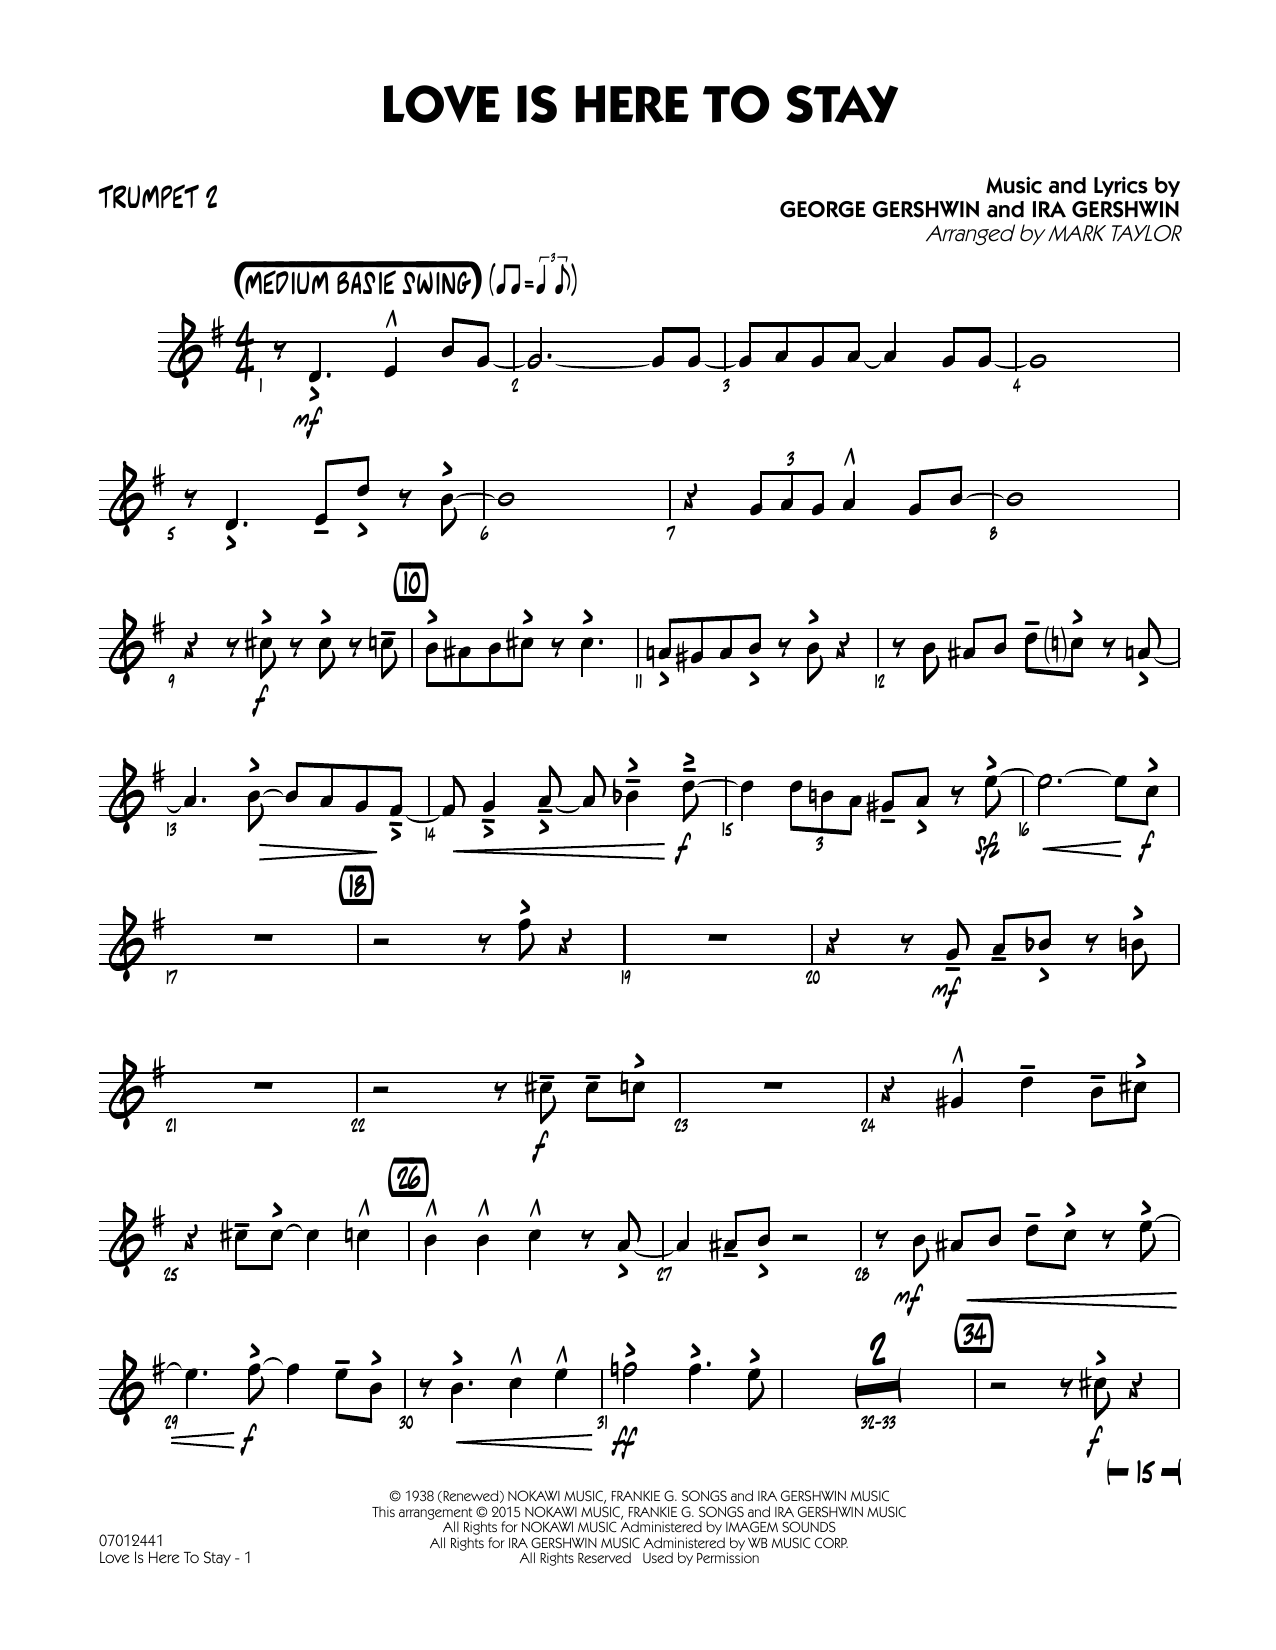 Mark Taylor Love Is Here to Stay - Trumpet 2 sheet music notes and chords. Download Printable PDF.